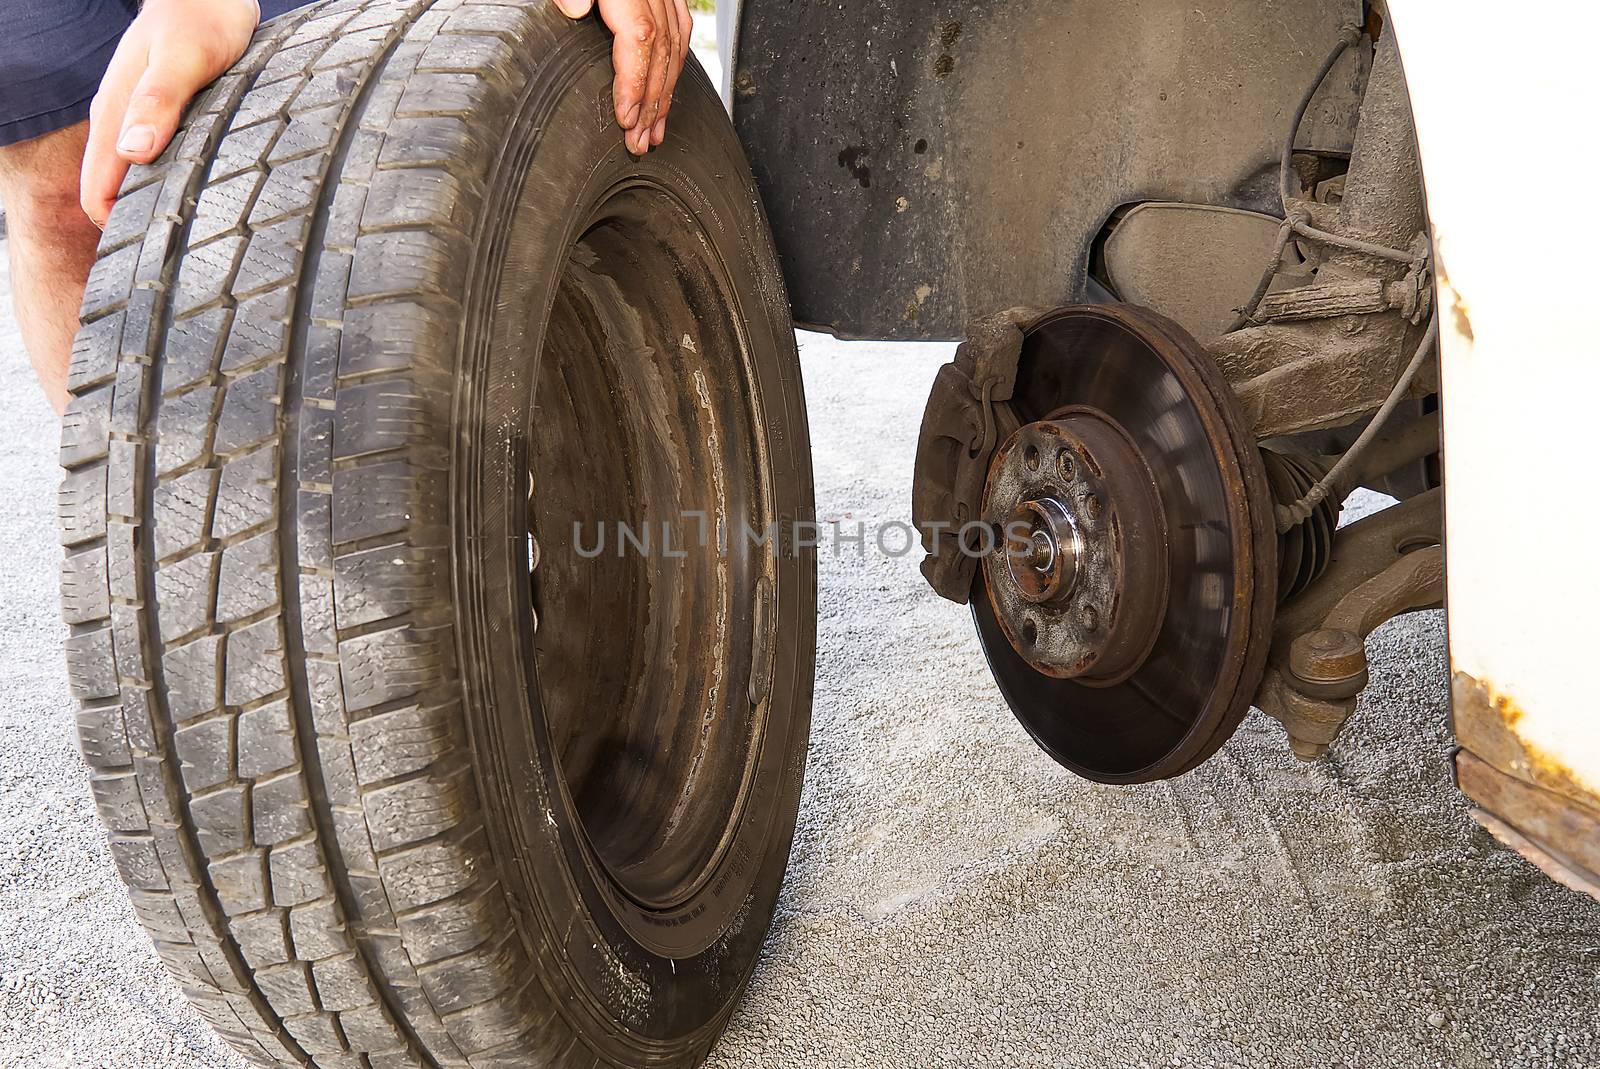 dismantling, mounting a car wheel to replace tires or replace brakes on an old car. Self-changing tires and wheel diagnostics